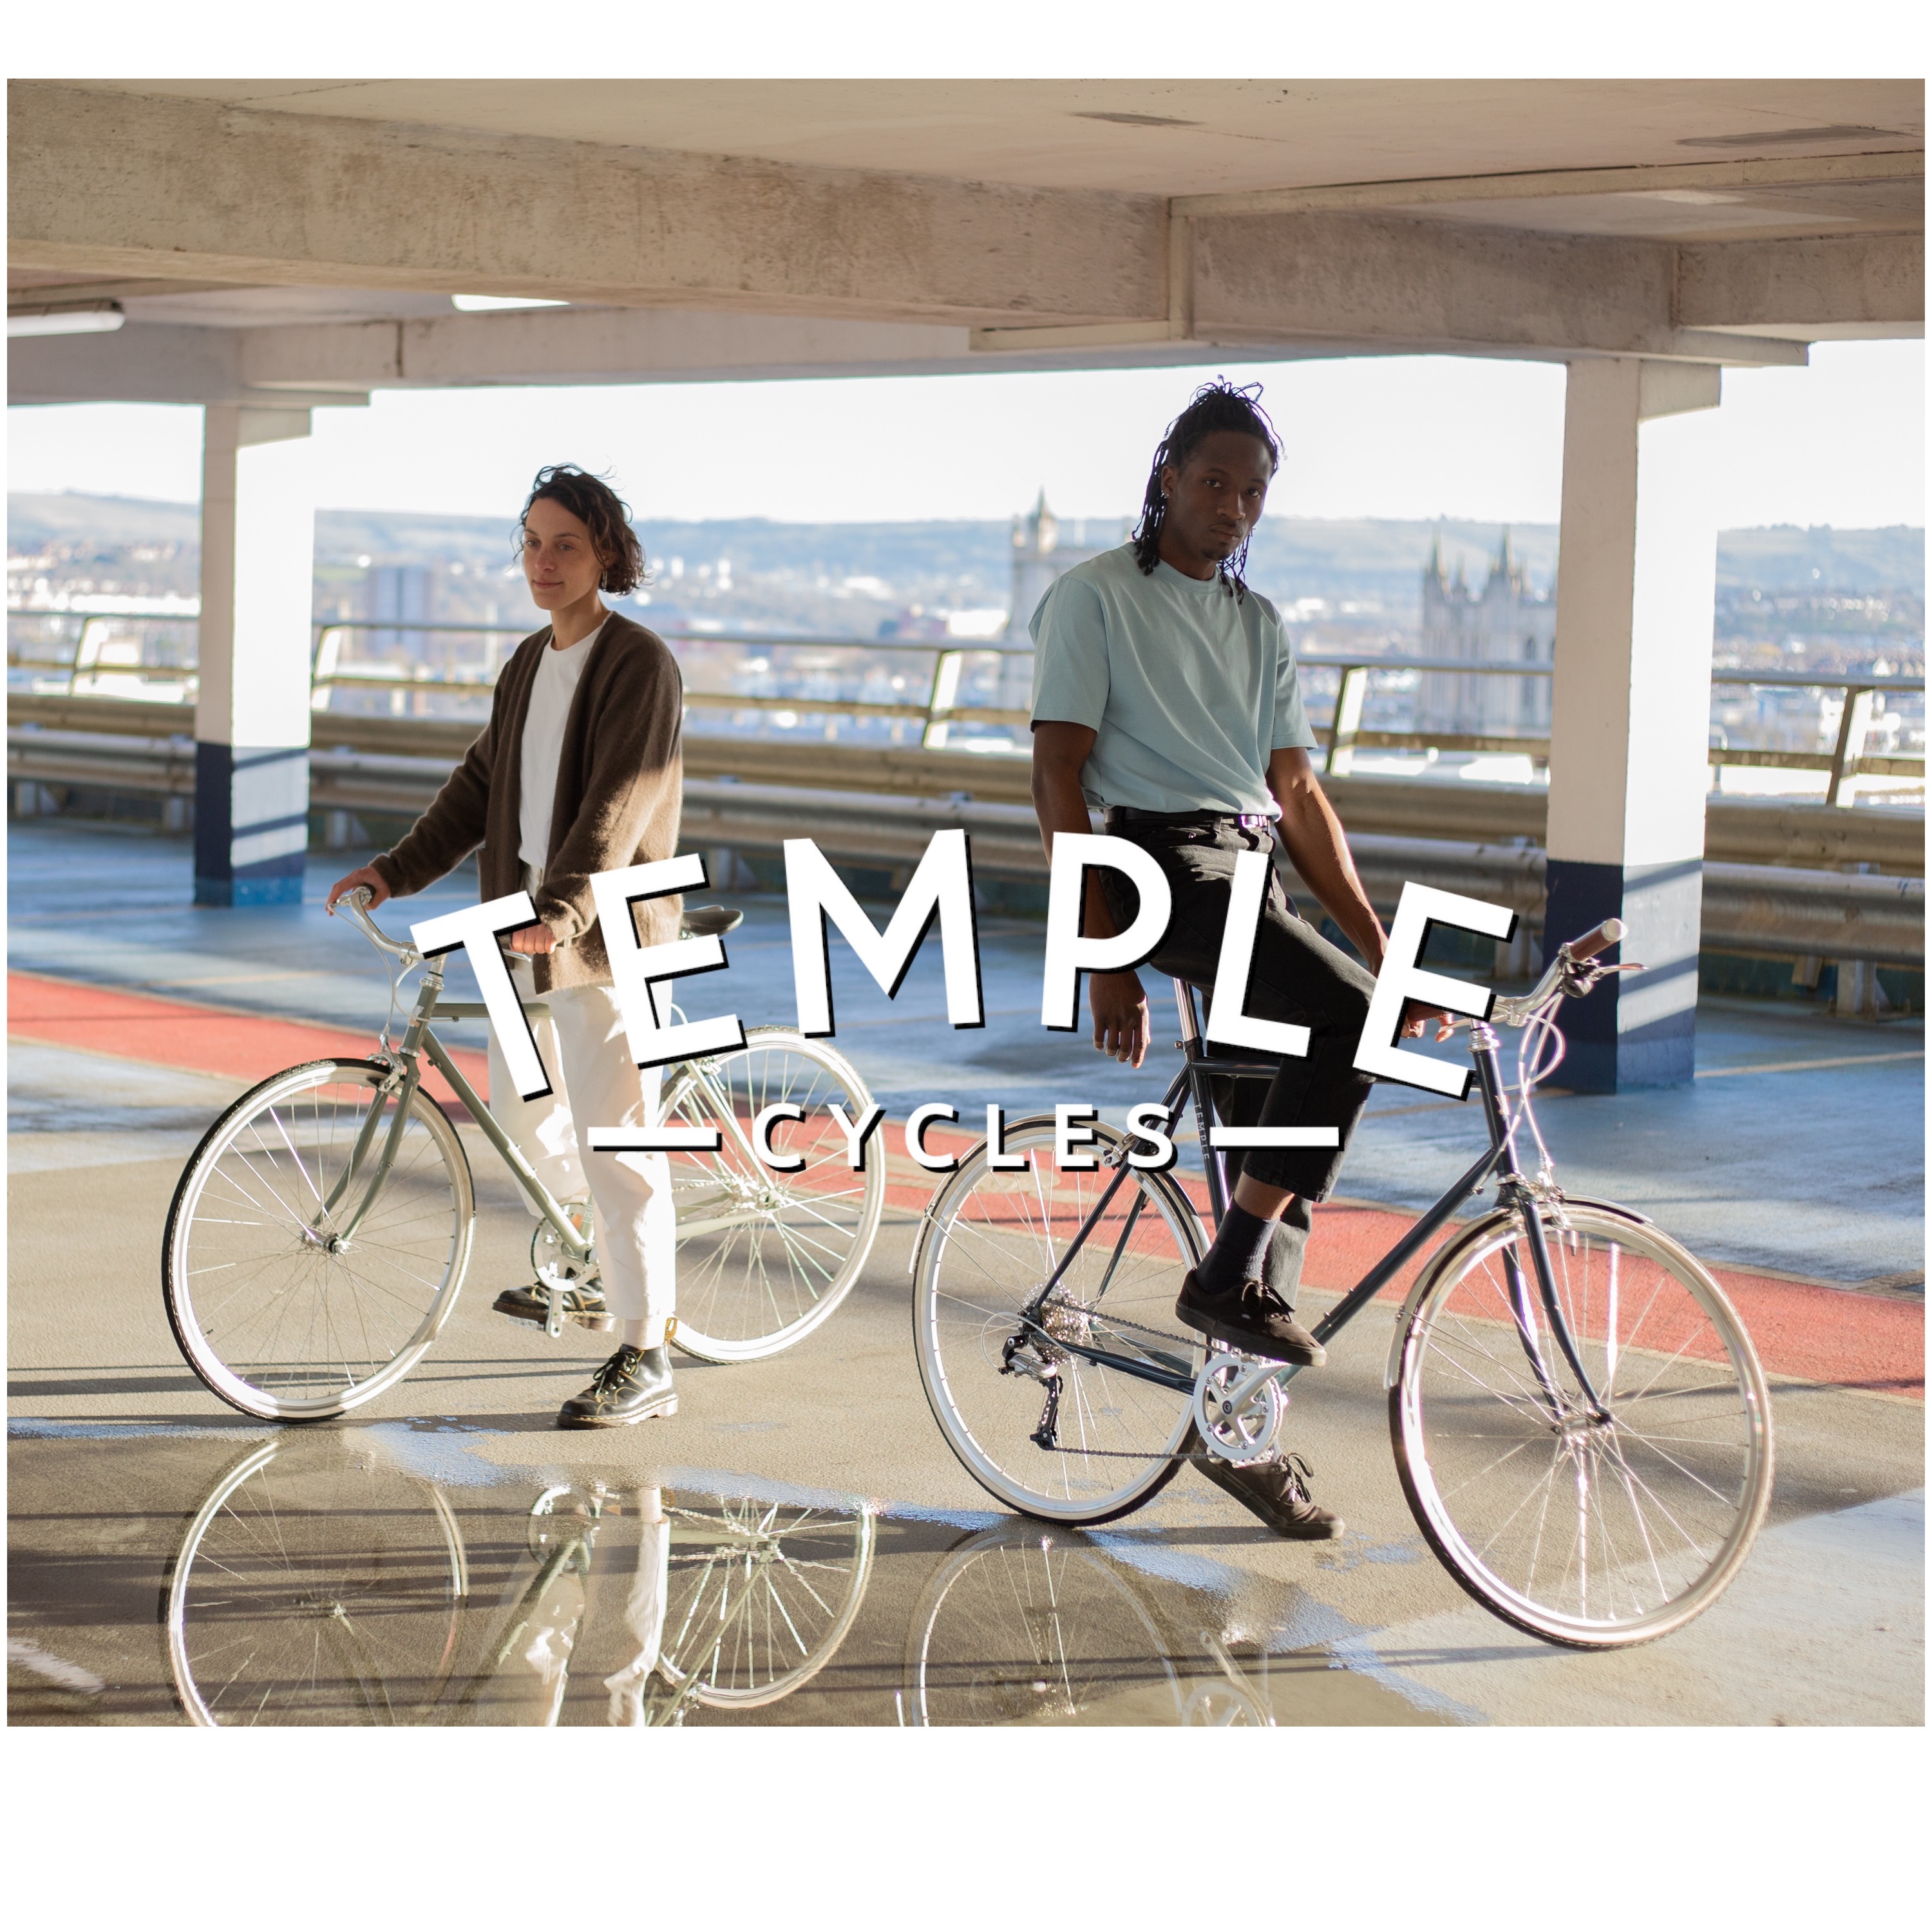 templecycles